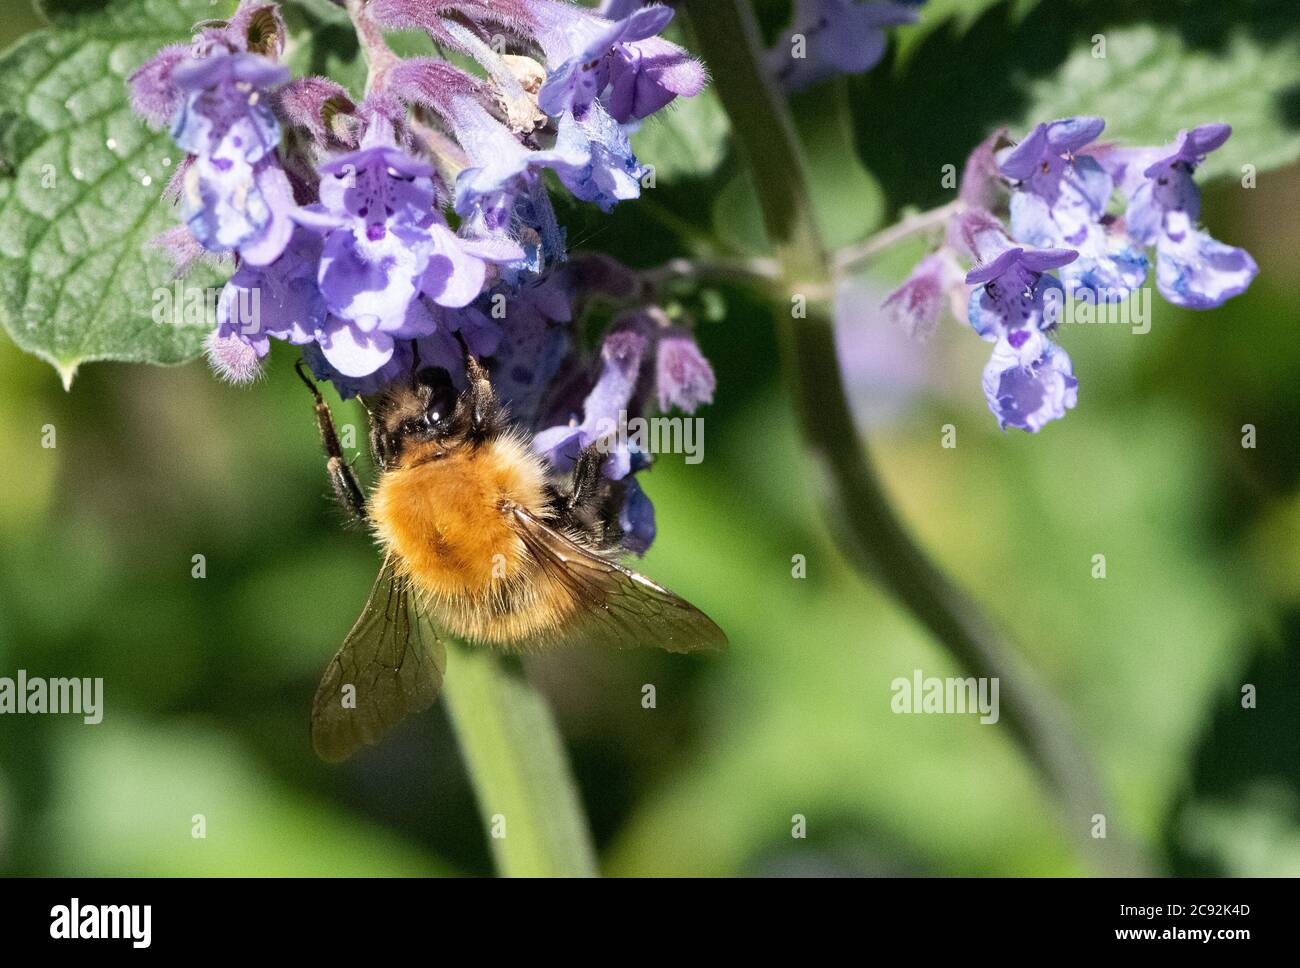 A Tree bumblebee on Catmint flowers, Chipping, Preston, Lancashire. Stock Photo